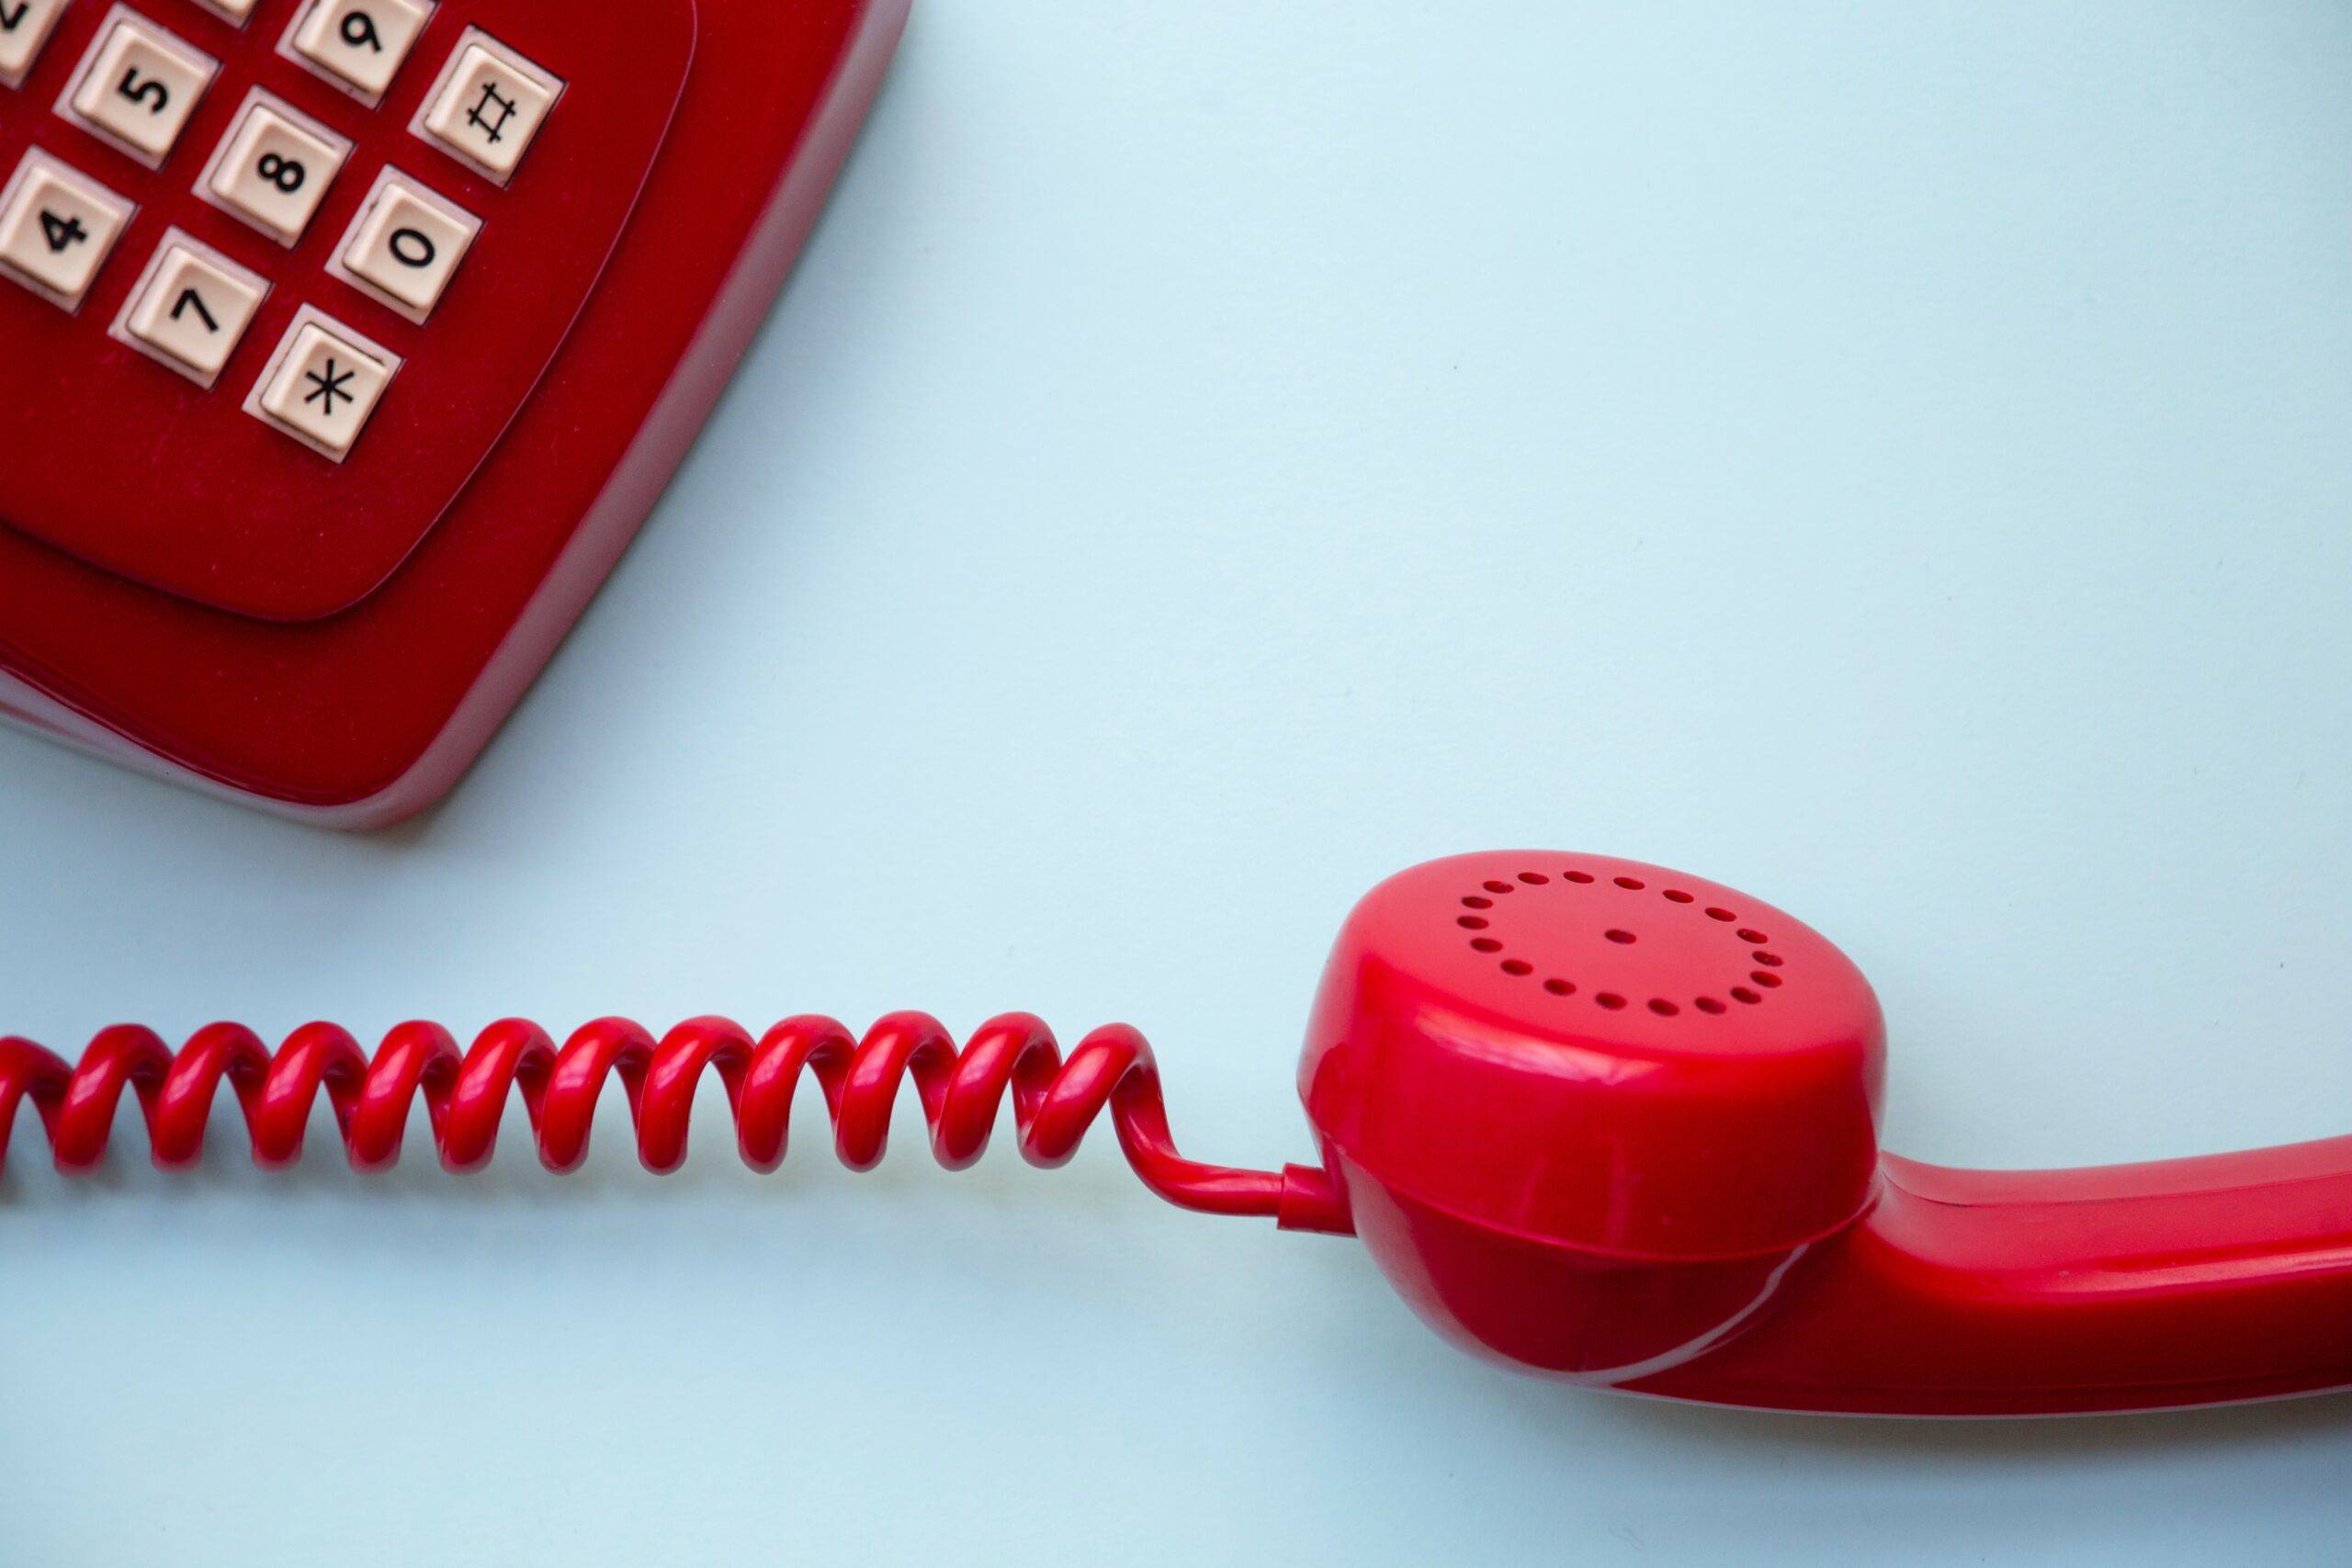 The telephone is still the king of customer support, so why aren't SMEs using it?